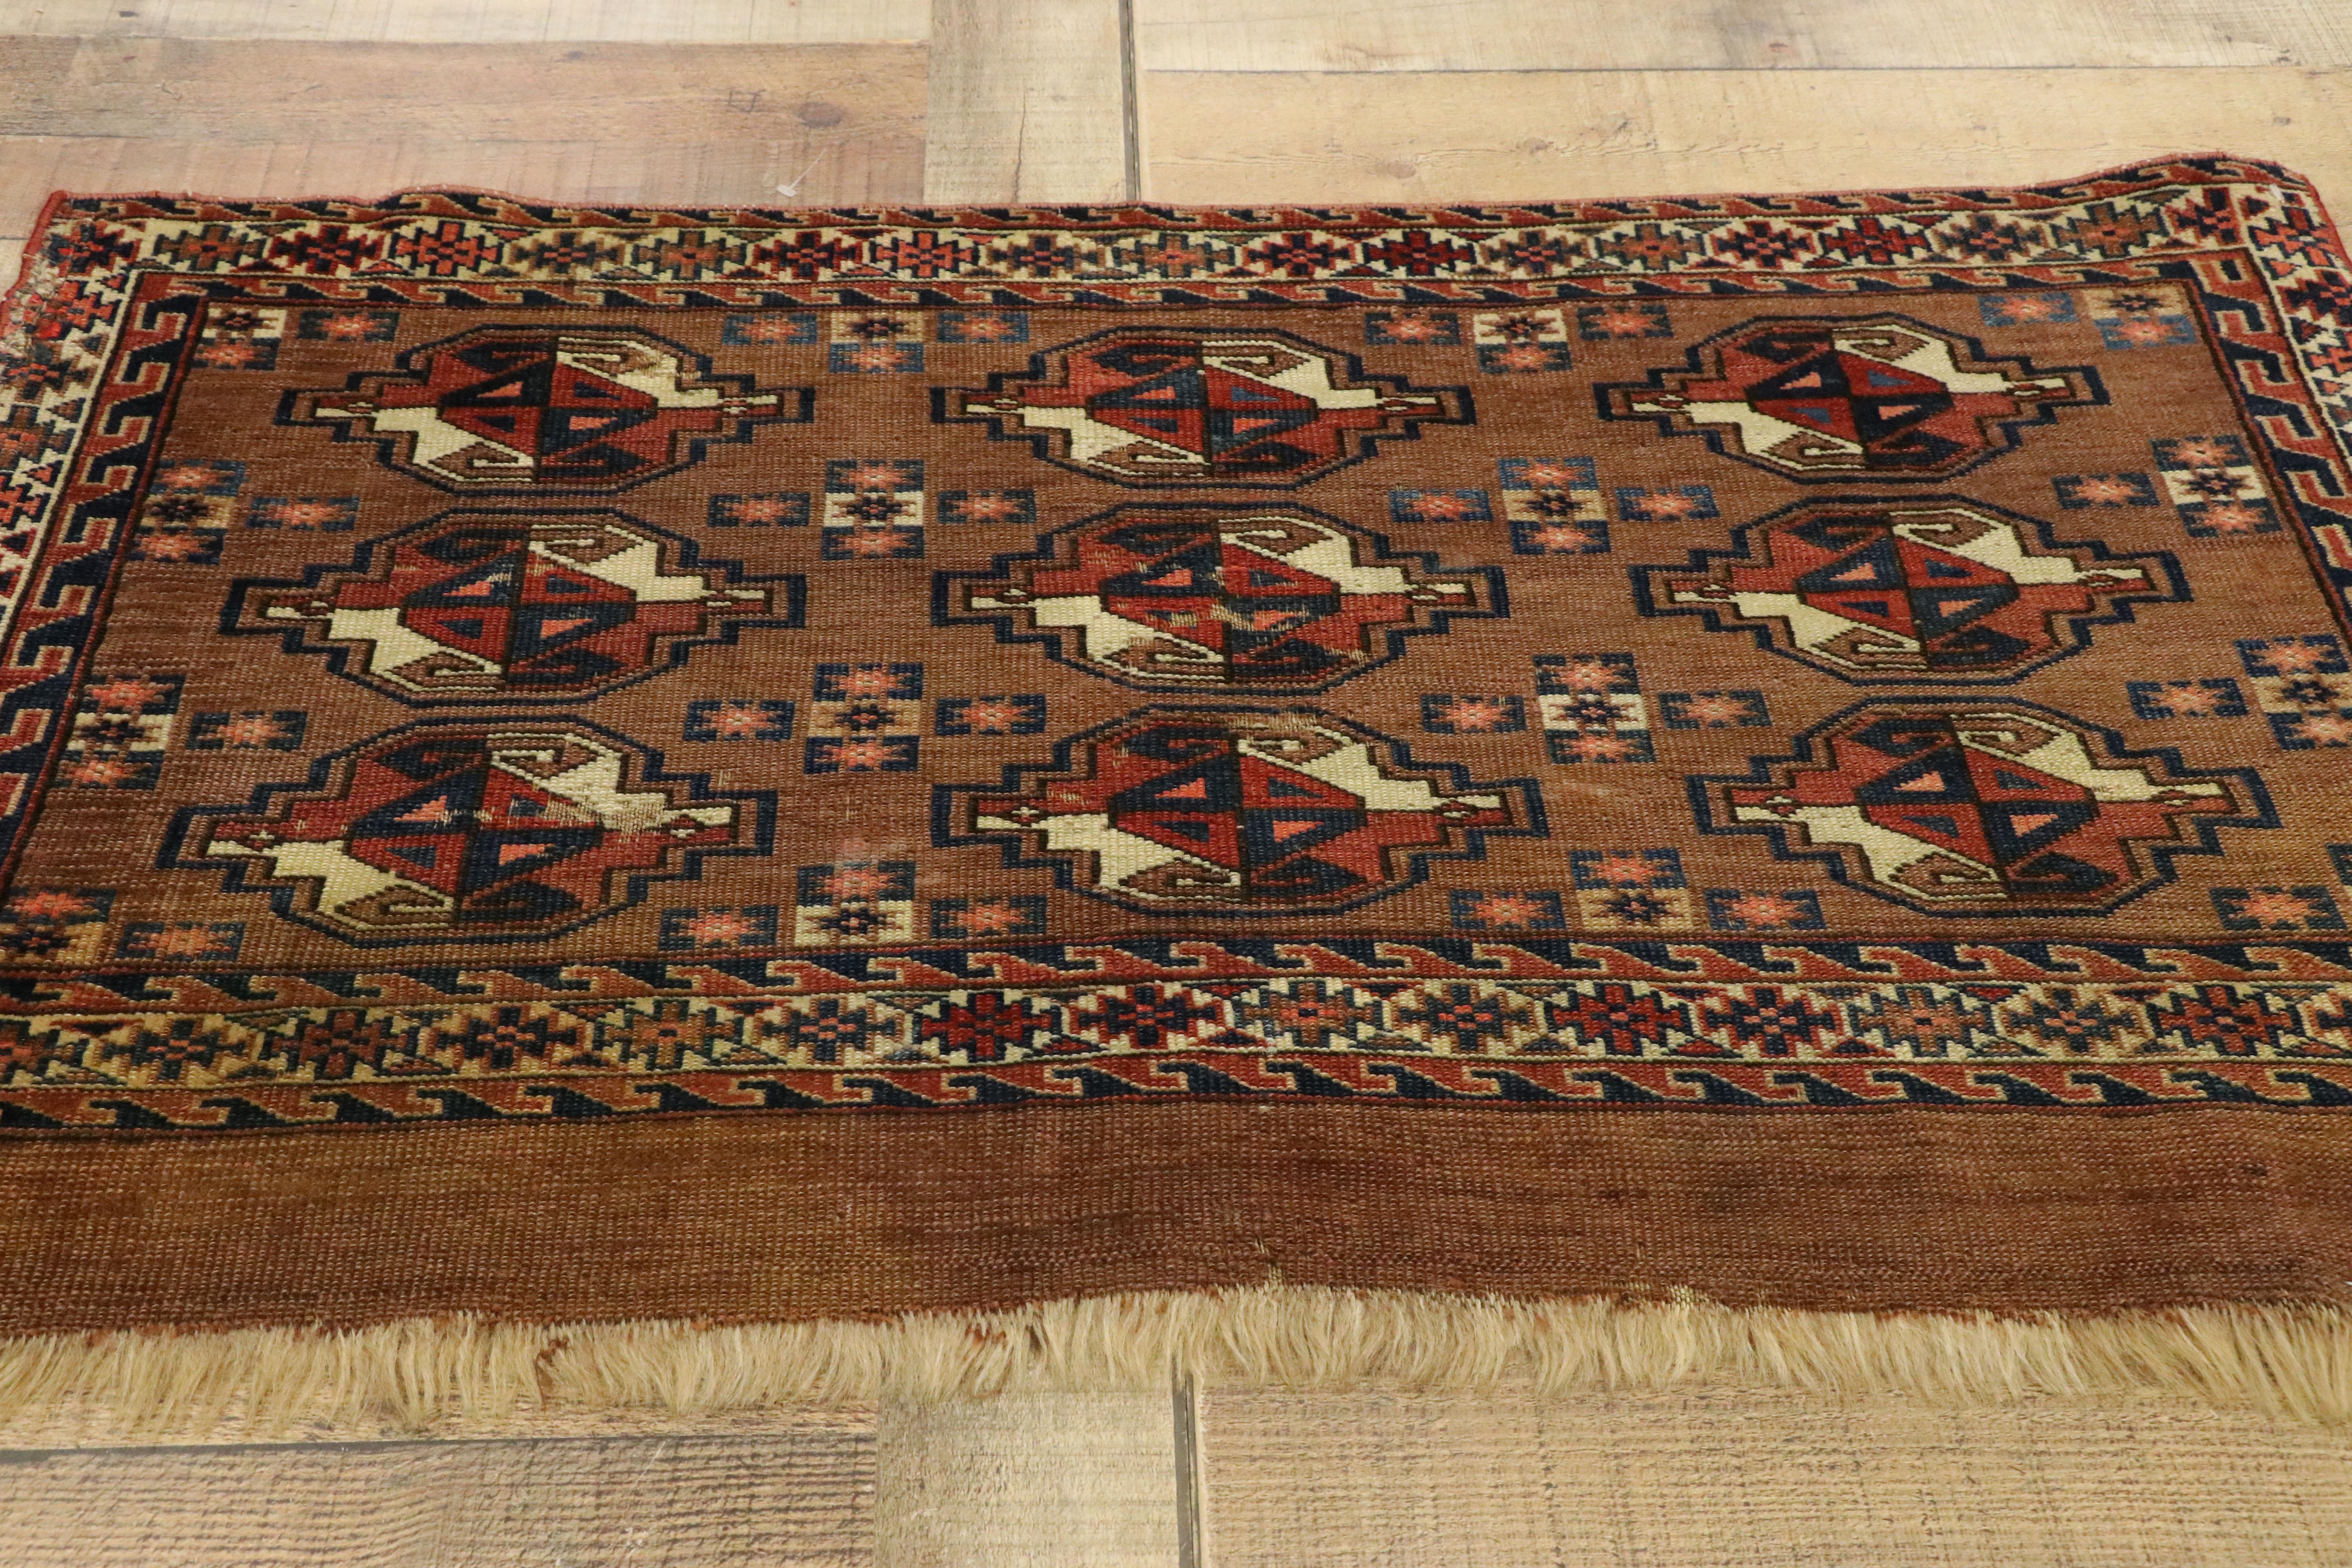 Antique Tekke Yomud Yomut Saryk Chuval Rug Bag Face, Turkmen Rug, Turkoman Rug In Good Condition For Sale In Dallas, TX